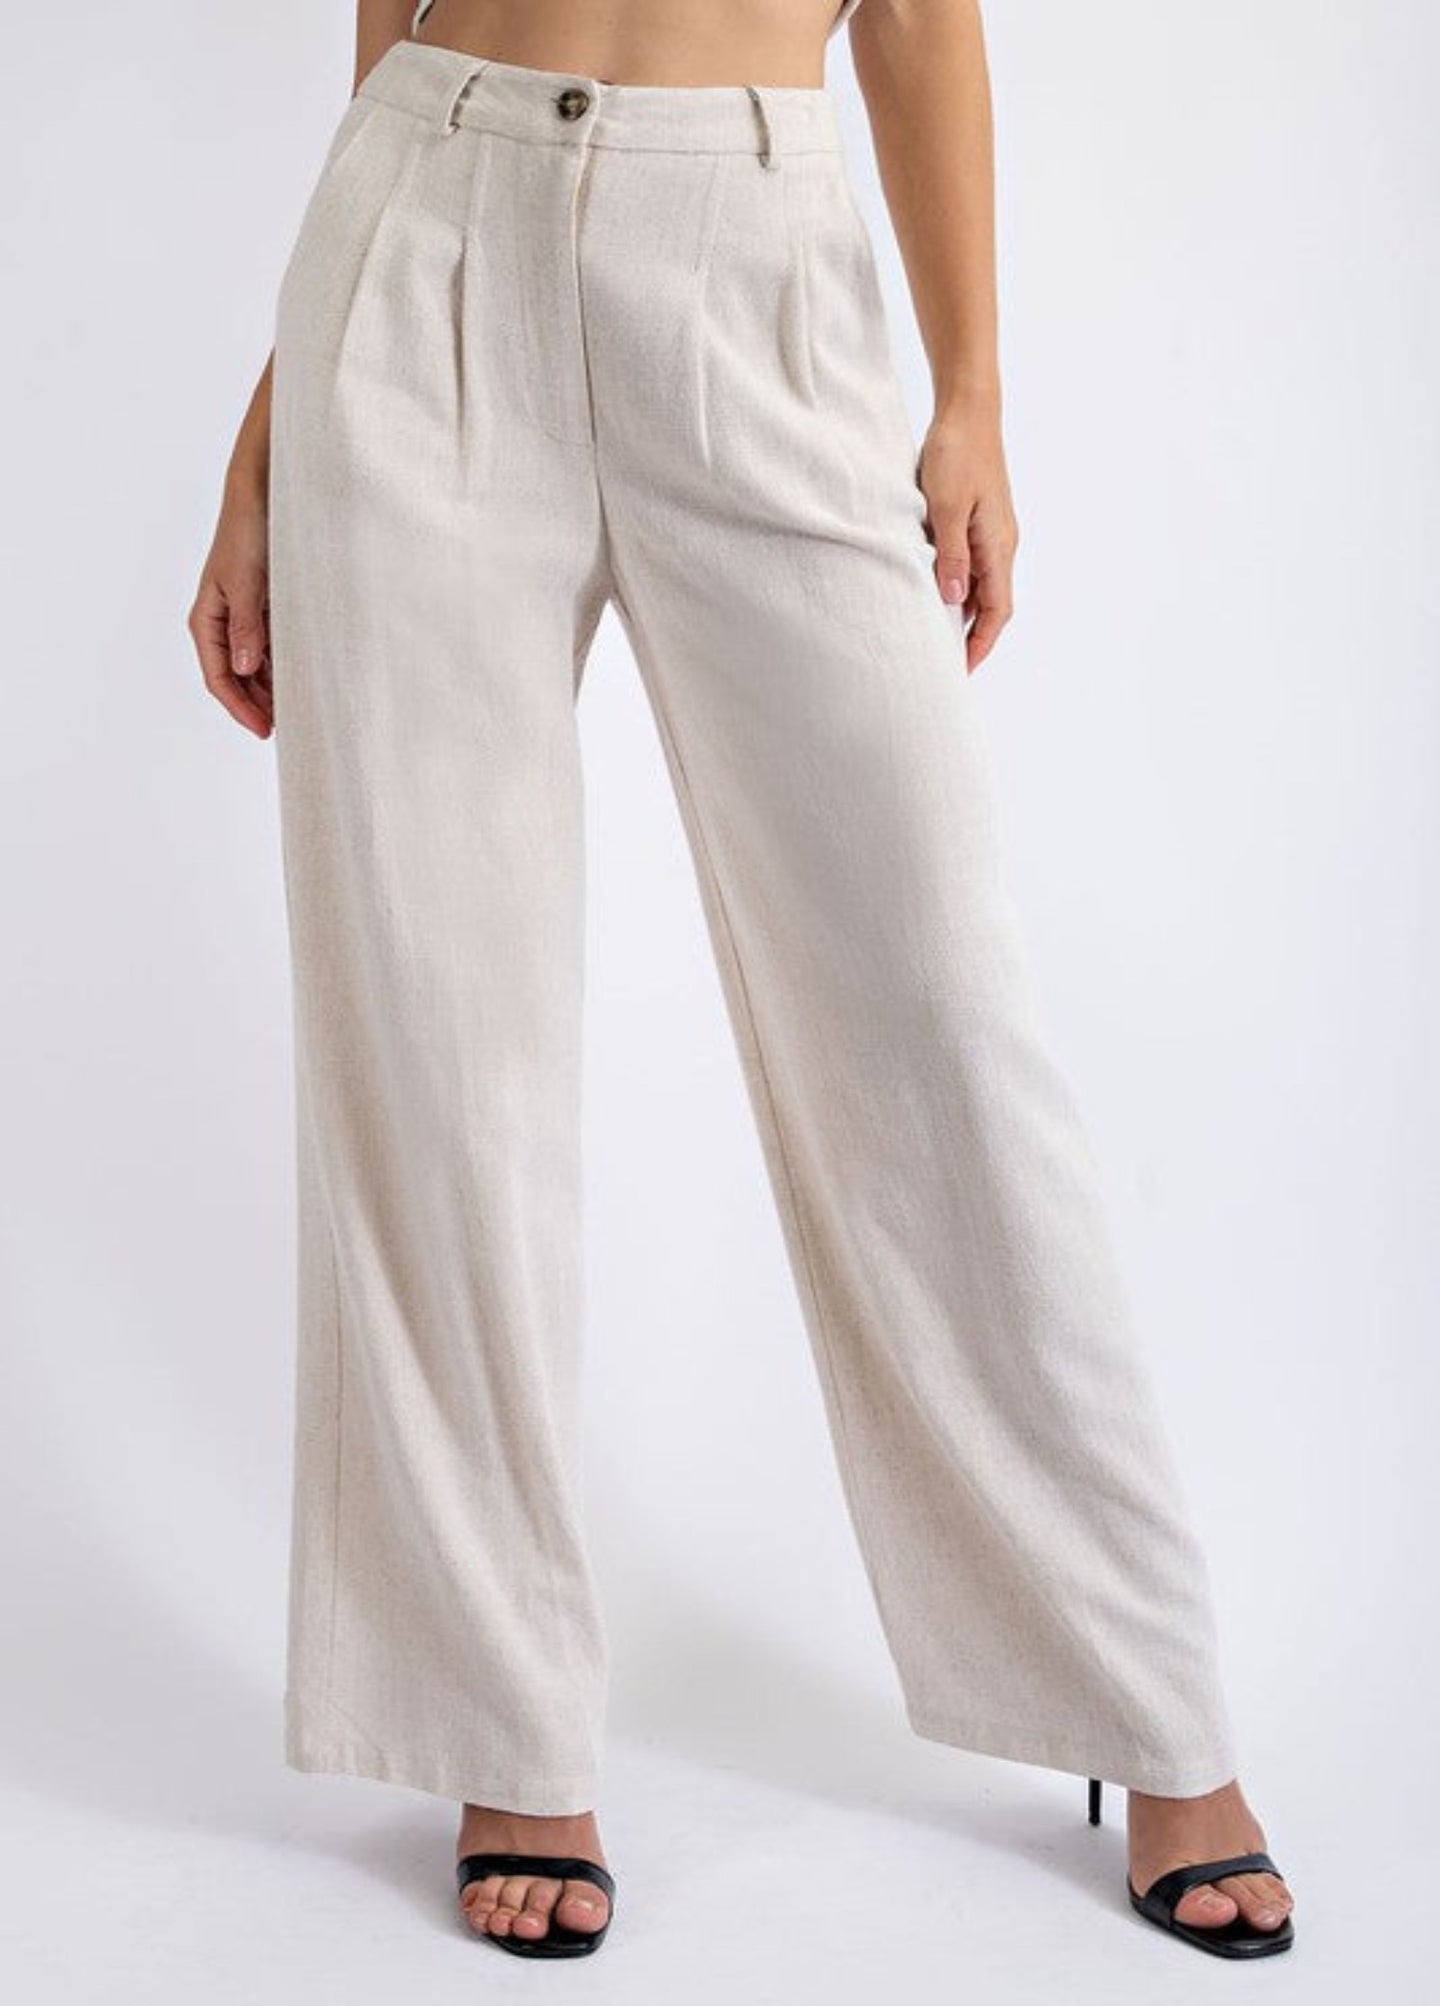 Photo of model wearing the Chelsea Linen Trousers in the color Oatmeal paired with black heels. Photo is taken from the torso down.